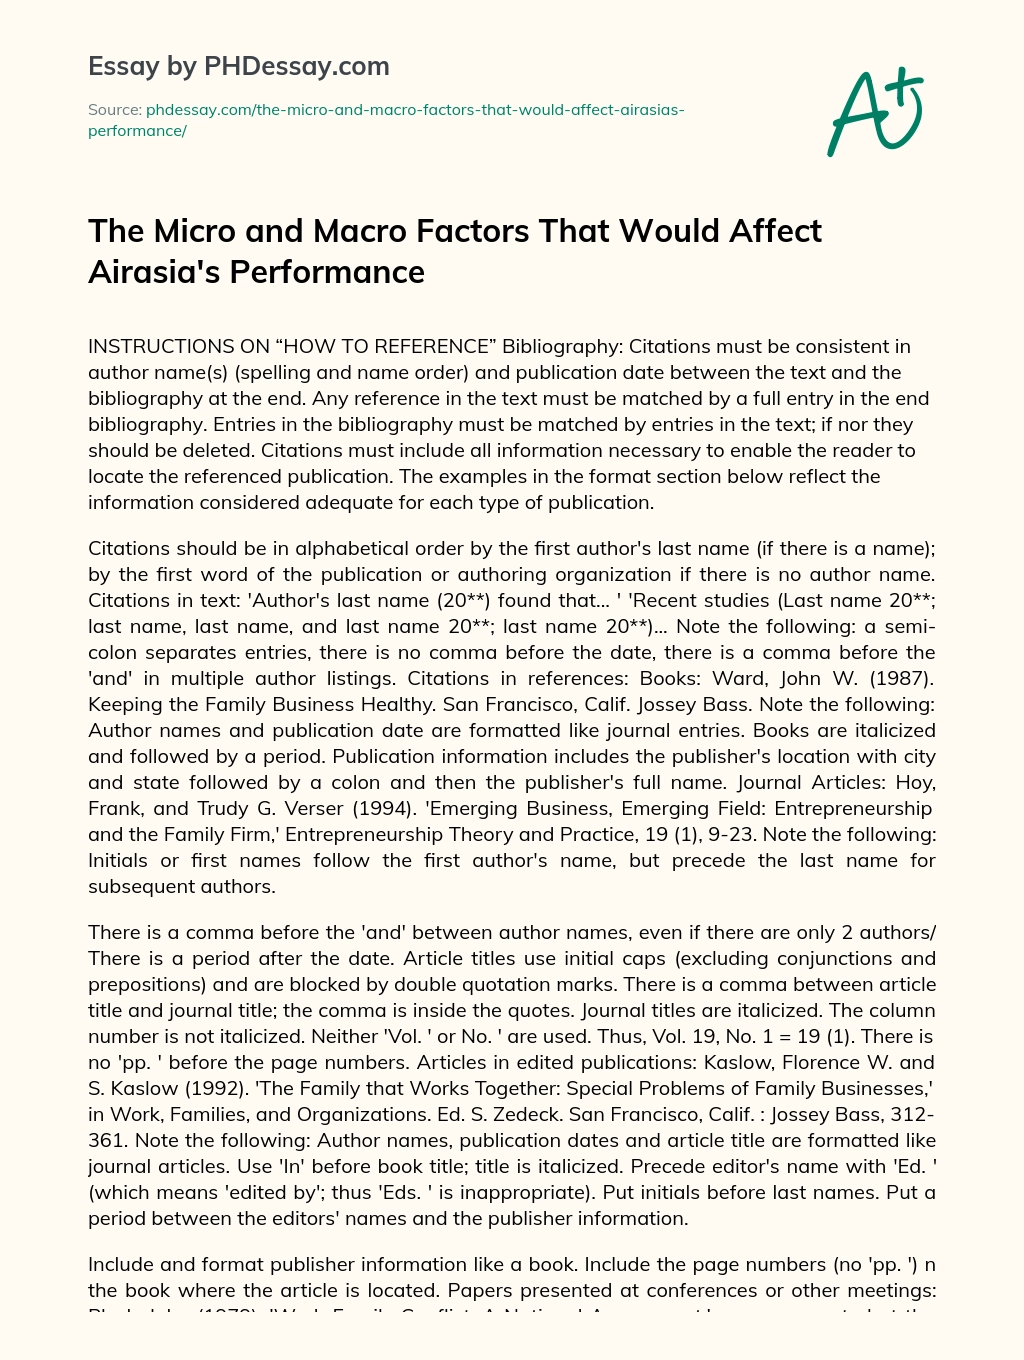 The Micro and Macro Factors That Would Affect Airasia’s Performance essay